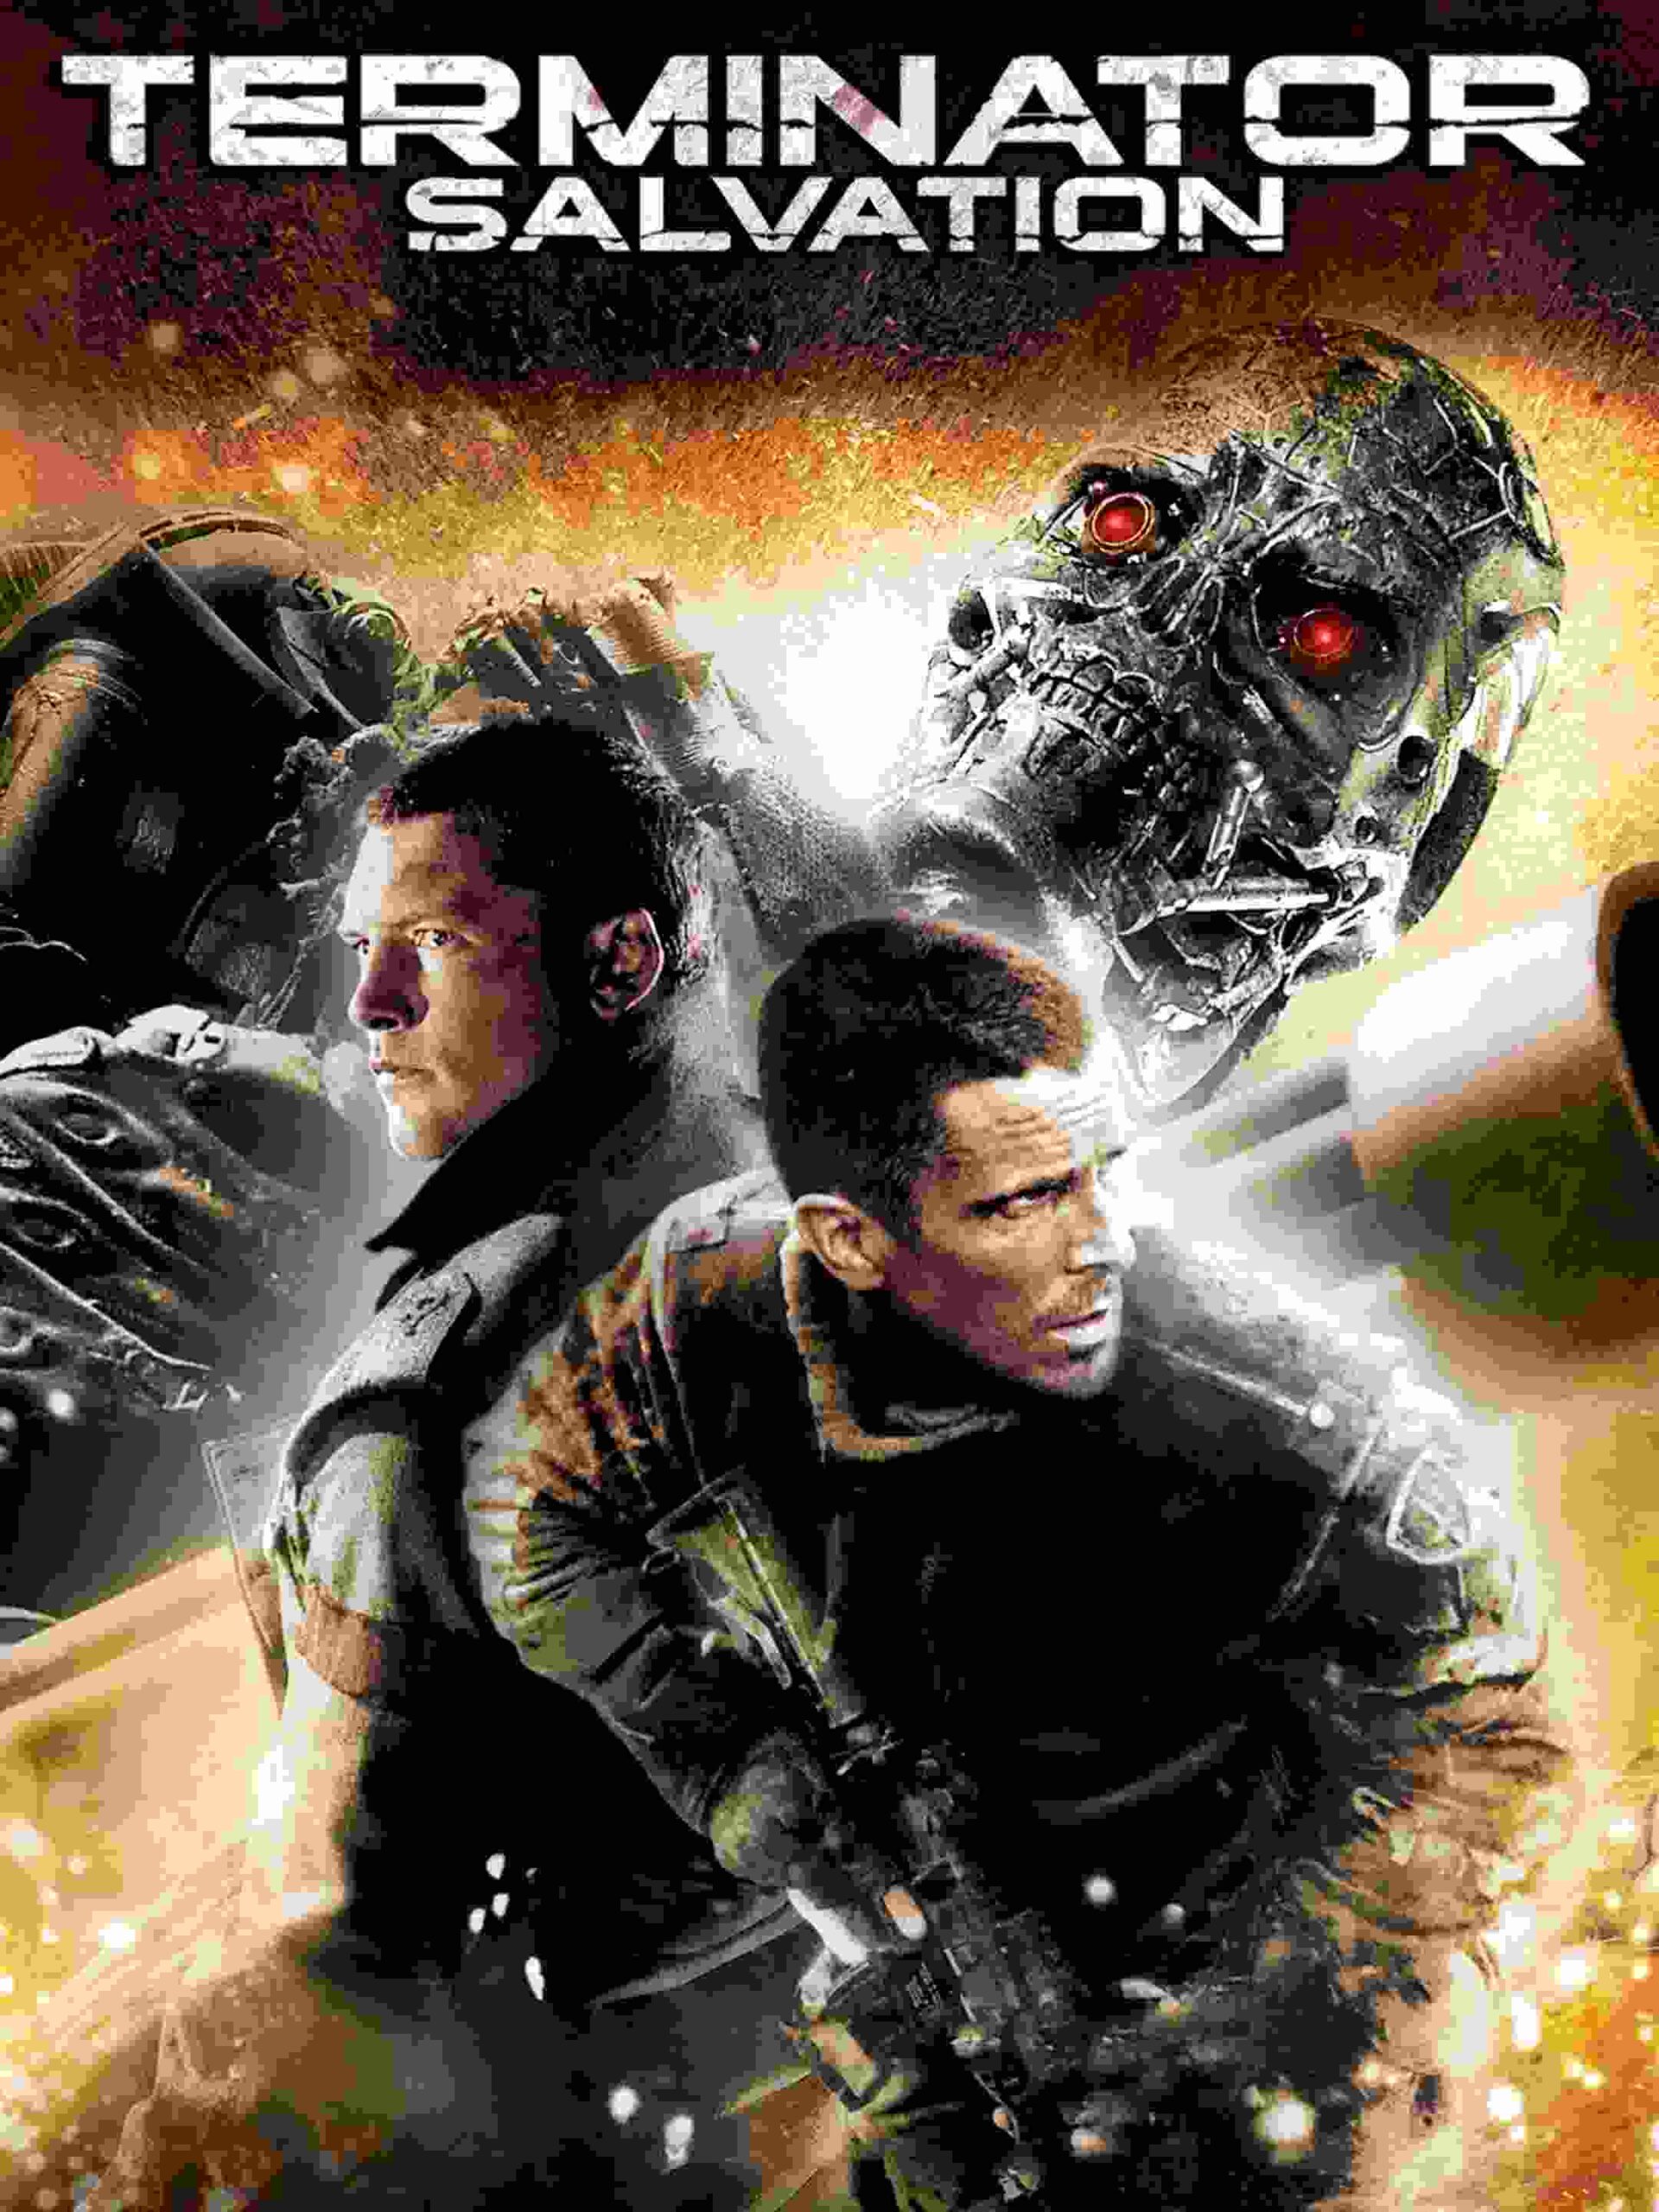 Terminator Salvation Parents Guide and Age rating | 2009